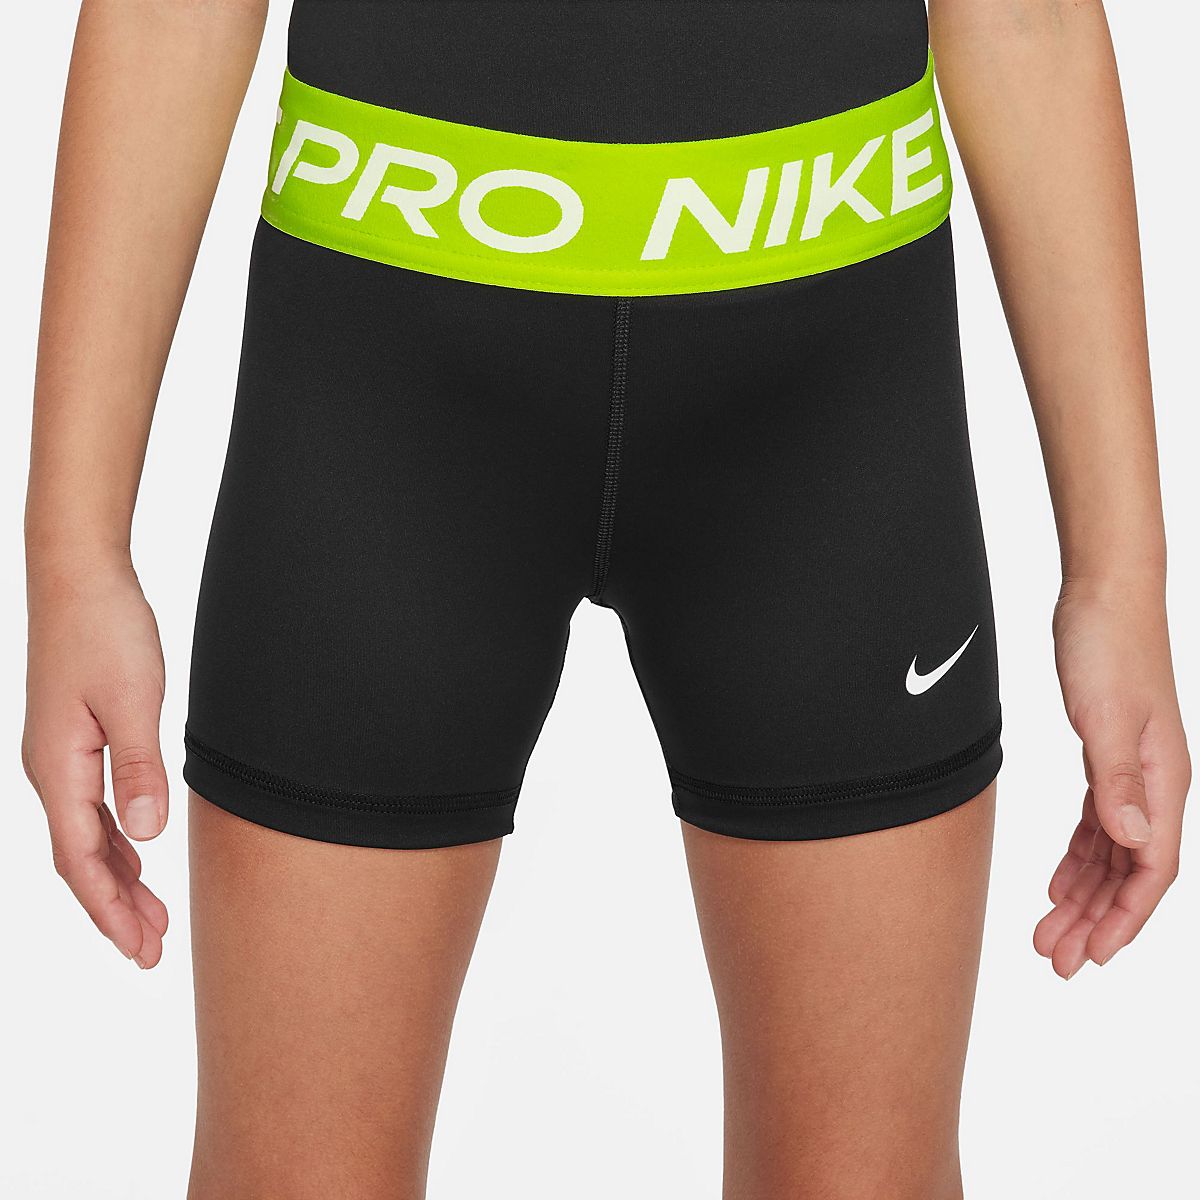 Shop Nike Padded Compression Shorts with great discounts and